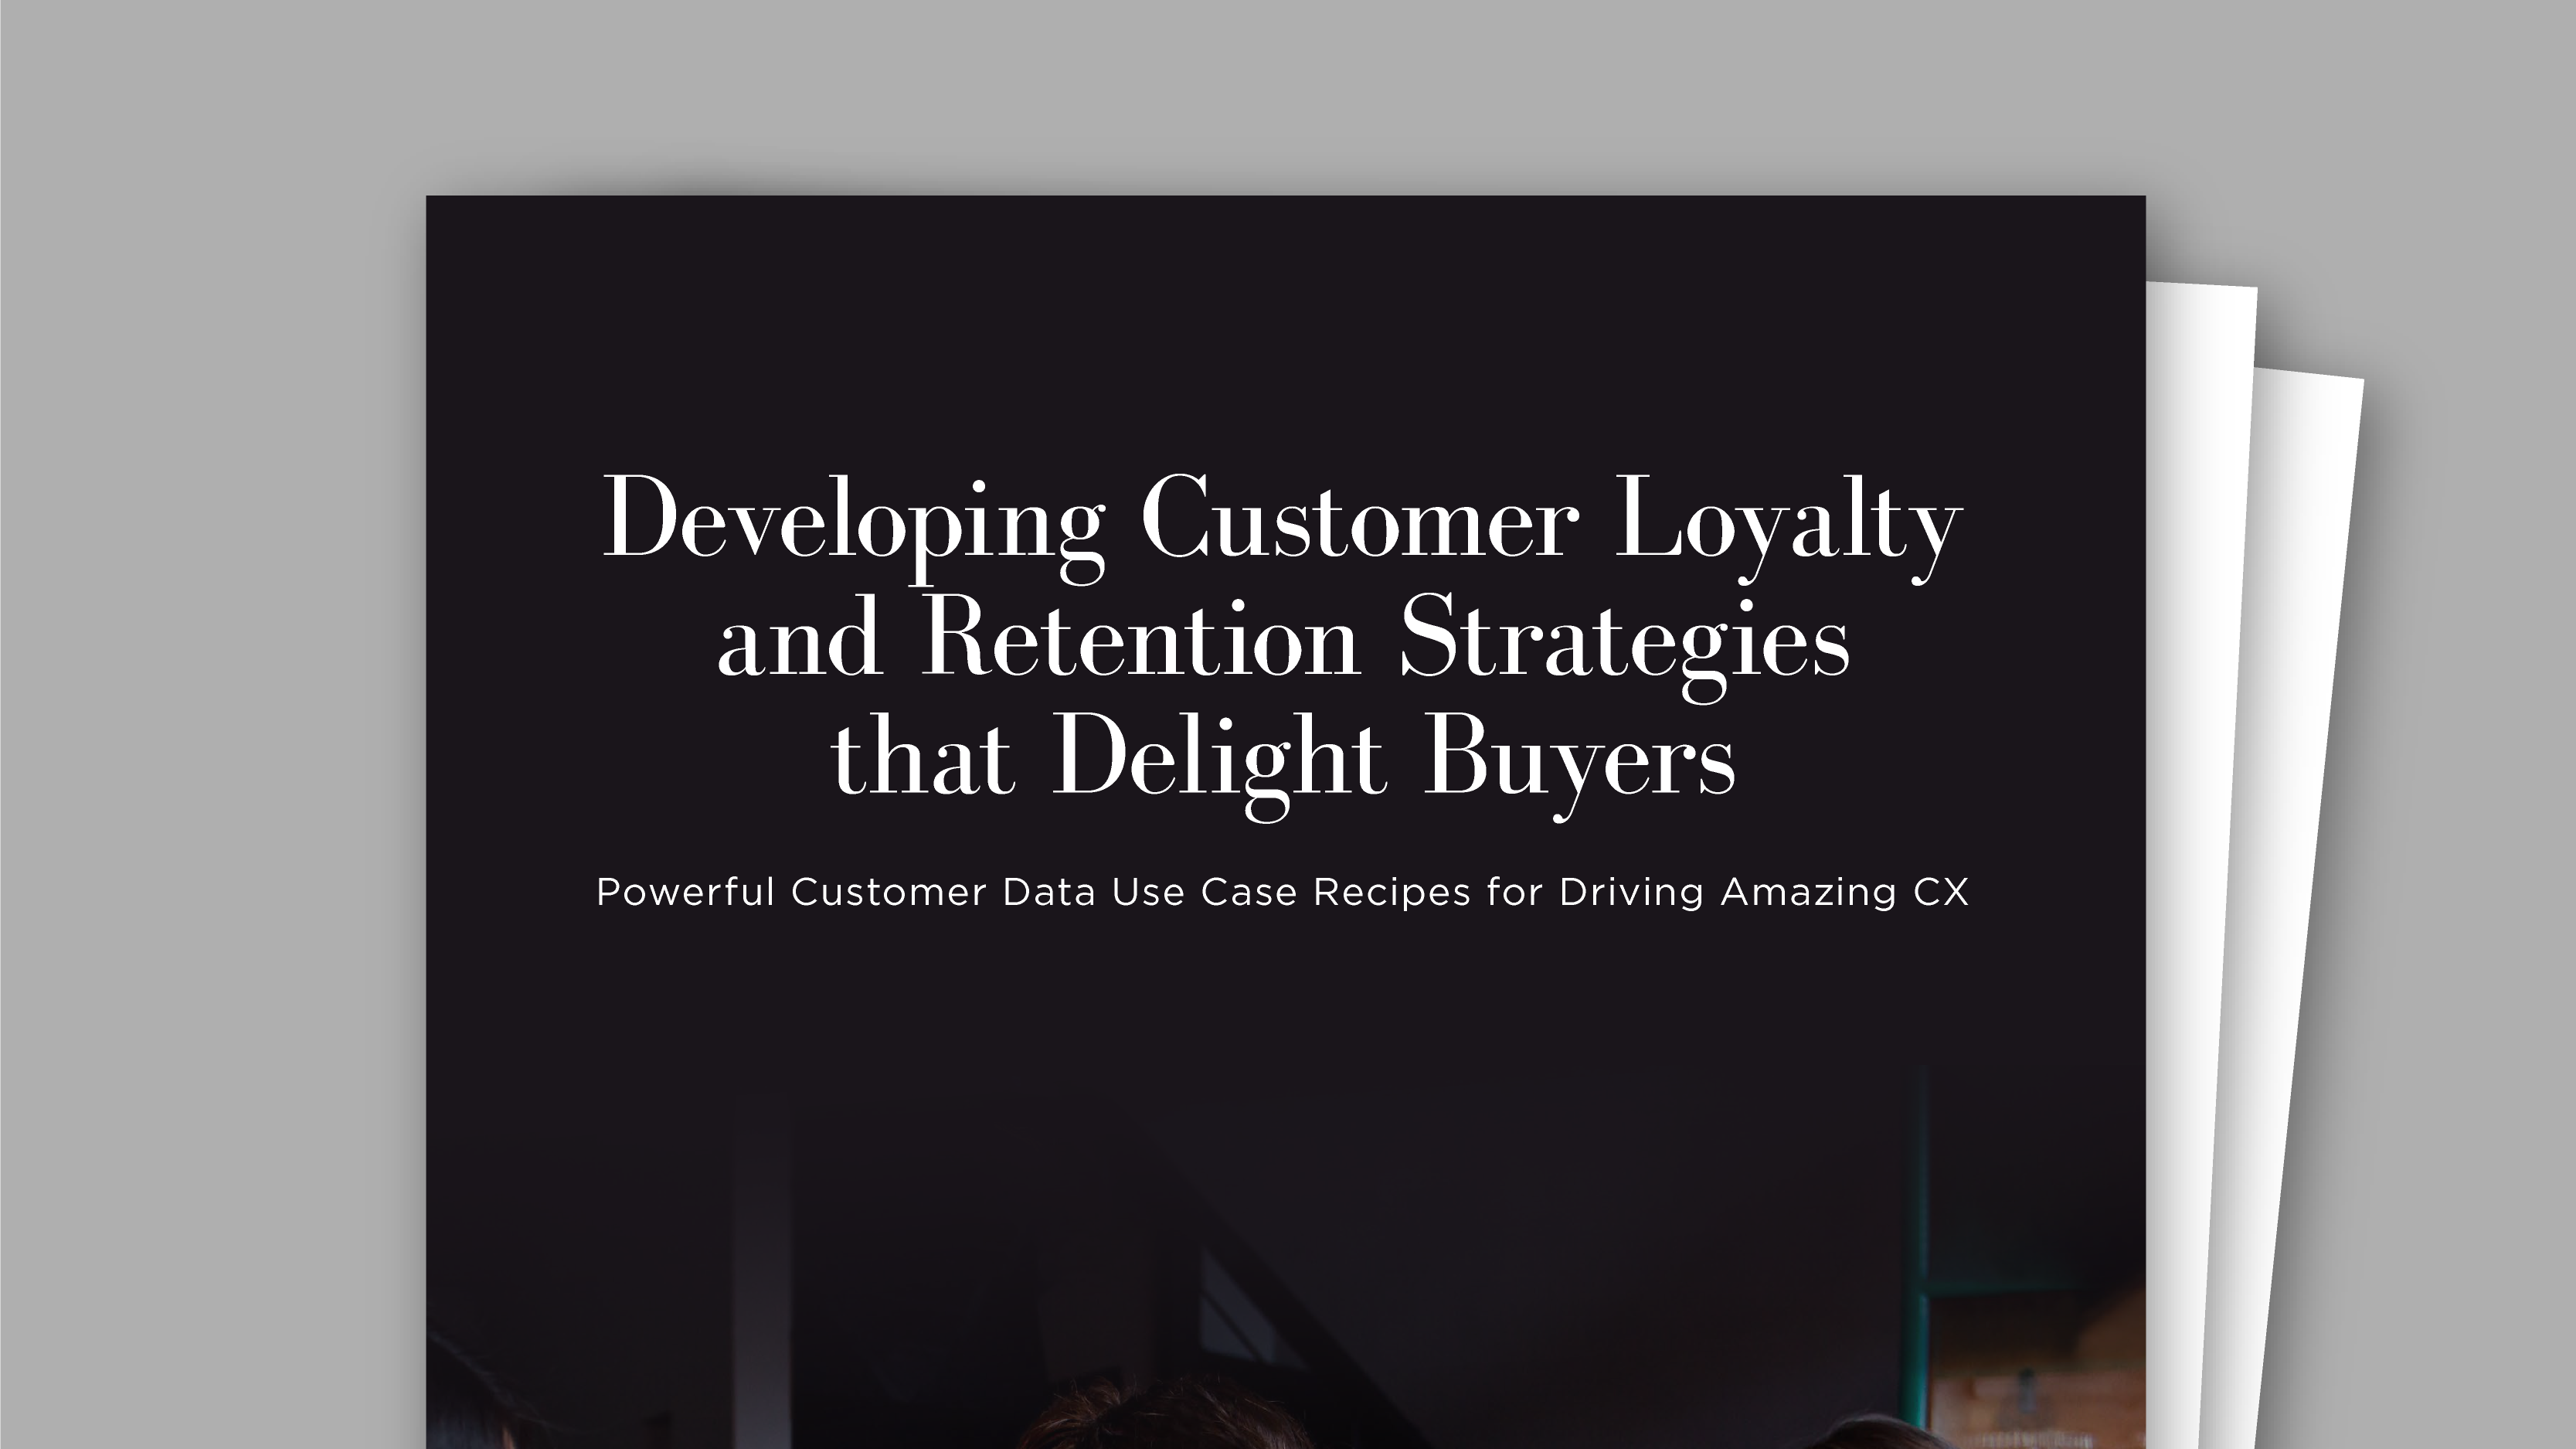 Developing Customer Loyalty and Retention Strategies That Delight Buyers